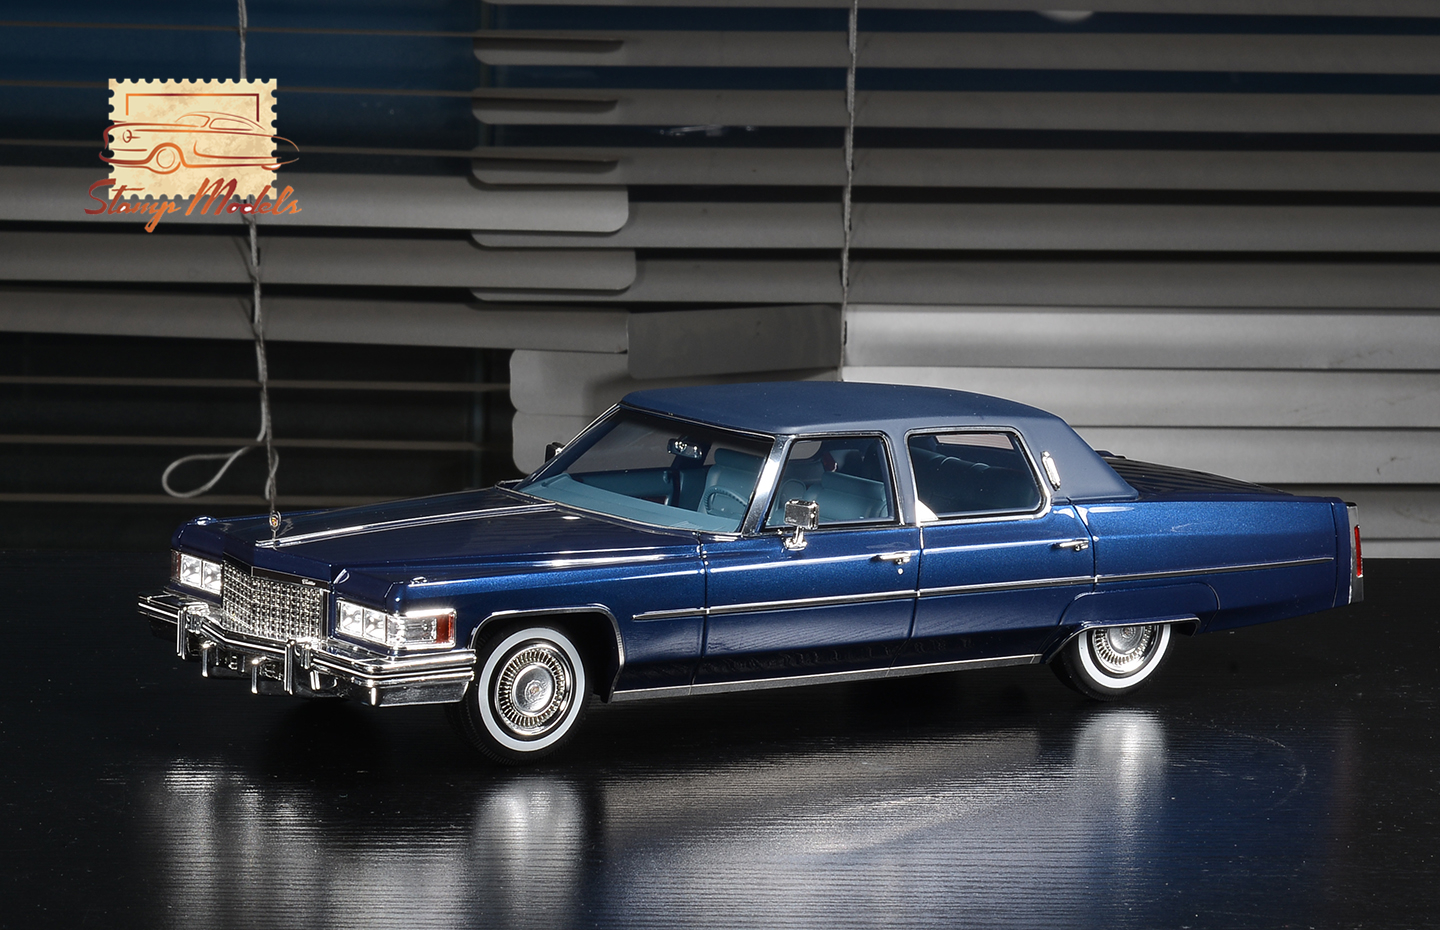 STM1976203 1976 Cadillac Fleetwood Sixty Special Brougham 1/18 Scale